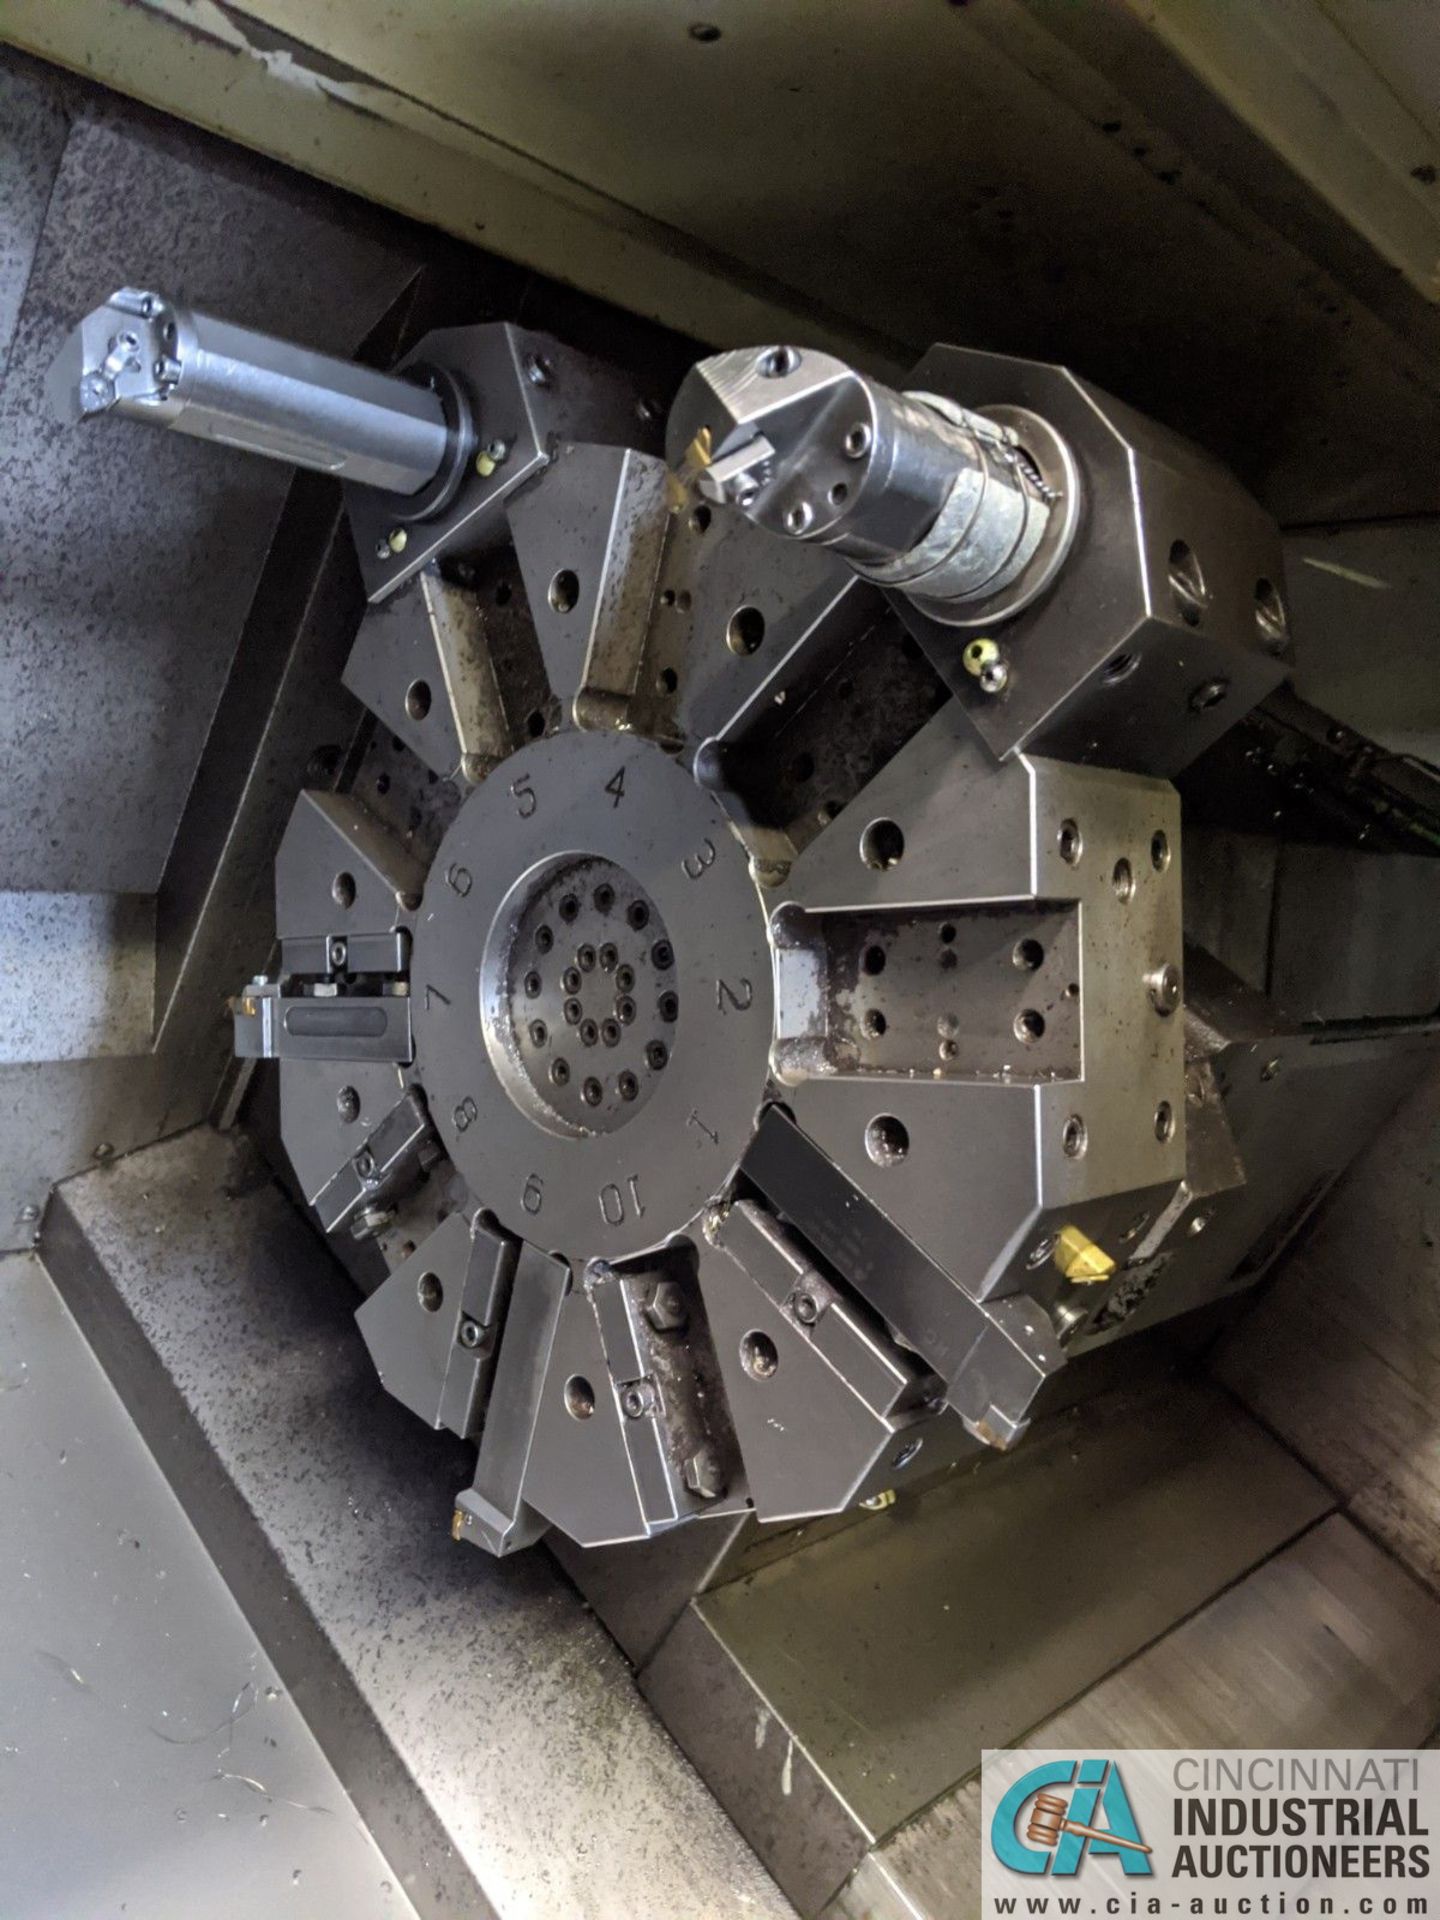 HAAS MODEL SL-40T CNC TURNING CENTER; S/N 69082, 18" 3-JAW CHUCK, 10 POSITION TURRET, TAILSTOCK, - Image 11 of 14